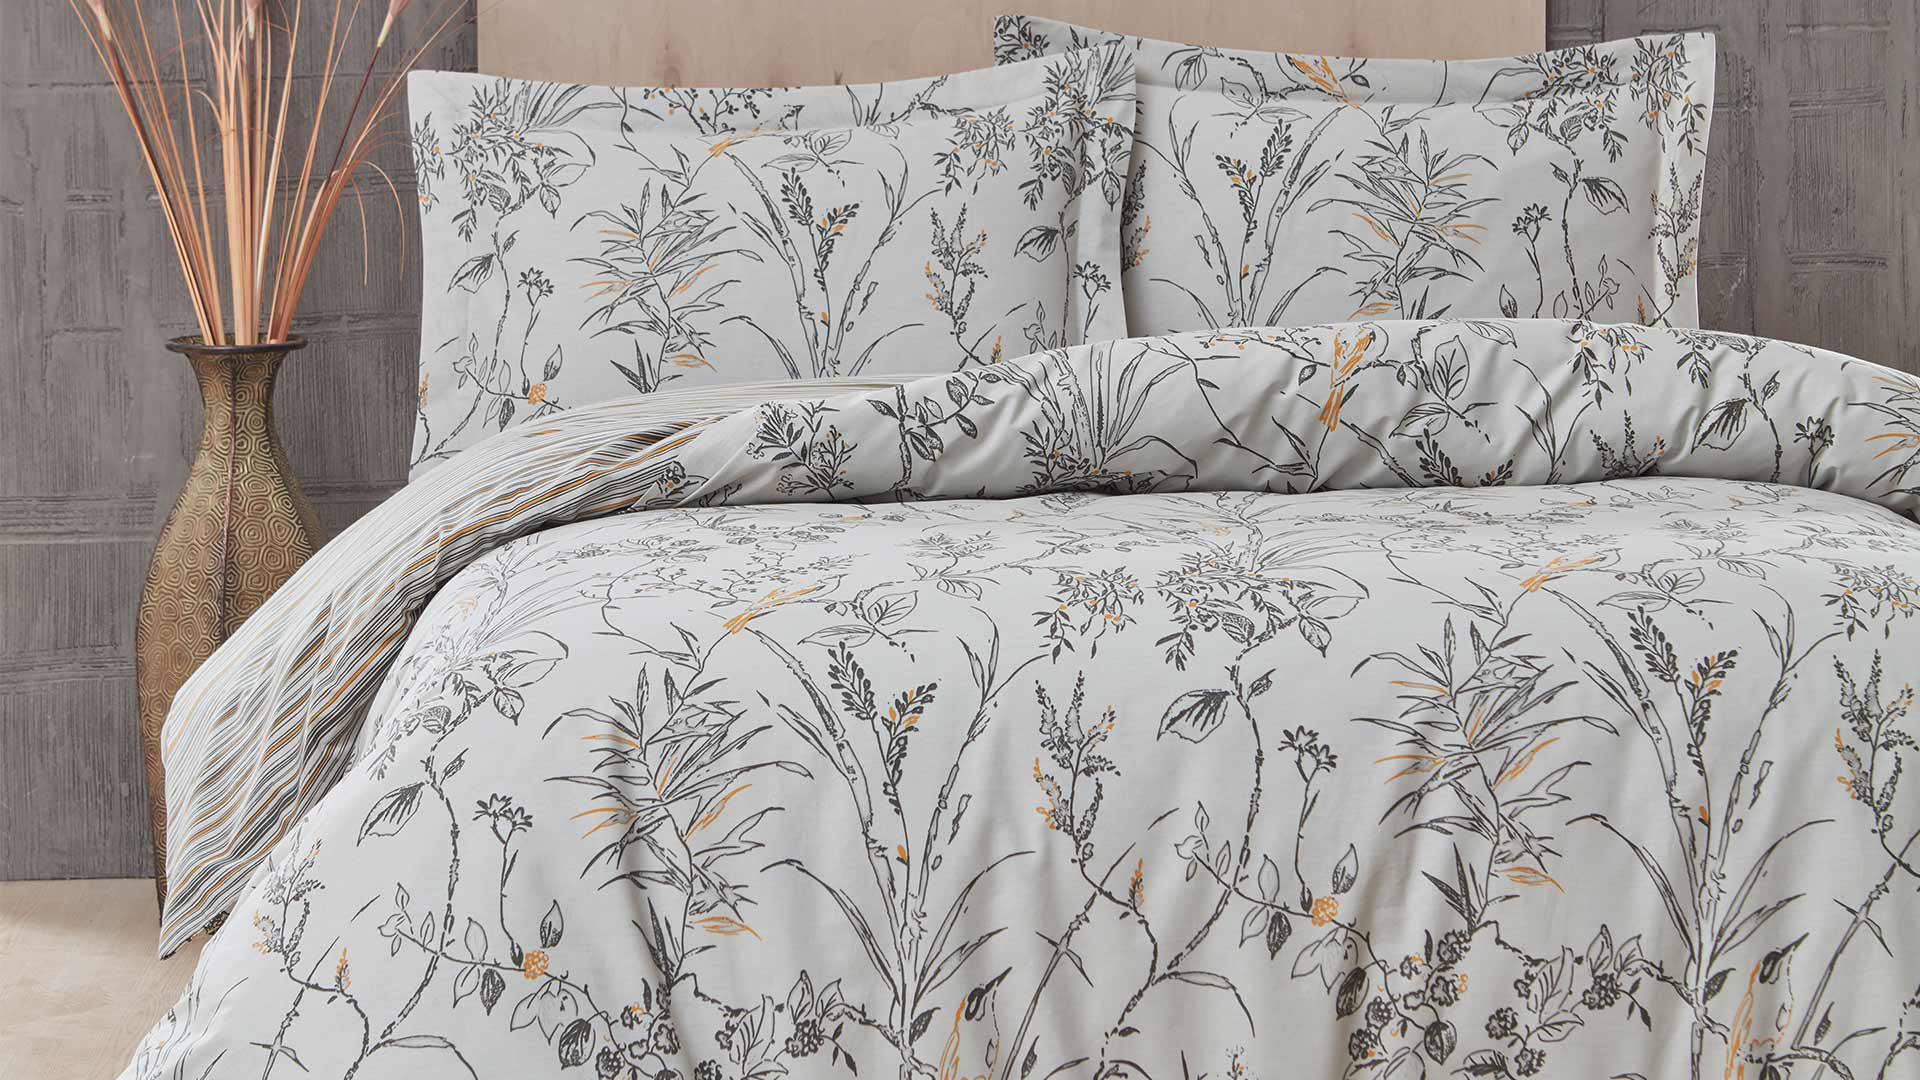 Gold Finch Duvet Cover Set Double, Duvet Cover With Zip Fastening